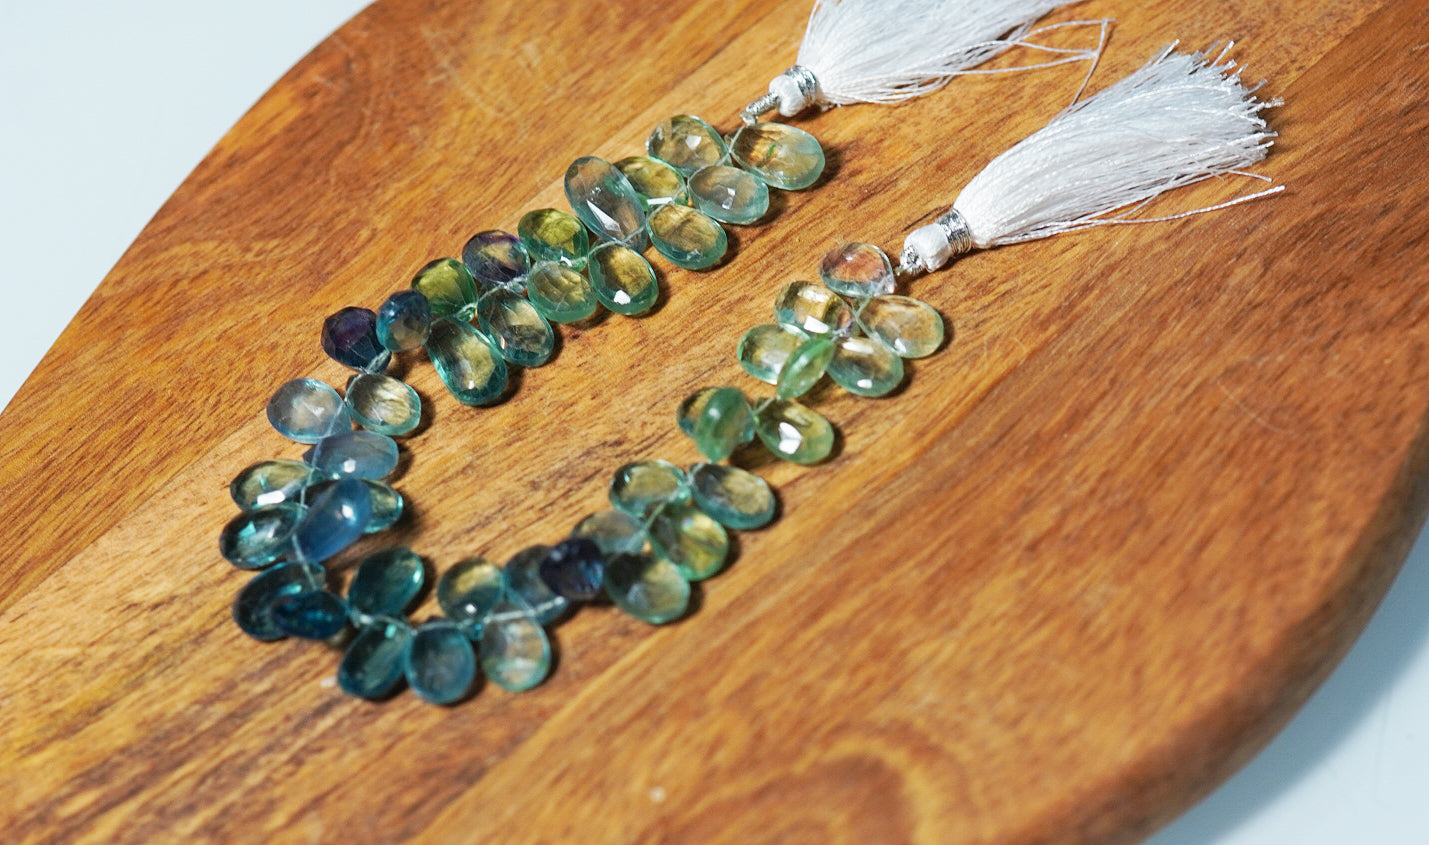 Fluorite Faceted Drop Strand - crystalsbysabeads.com